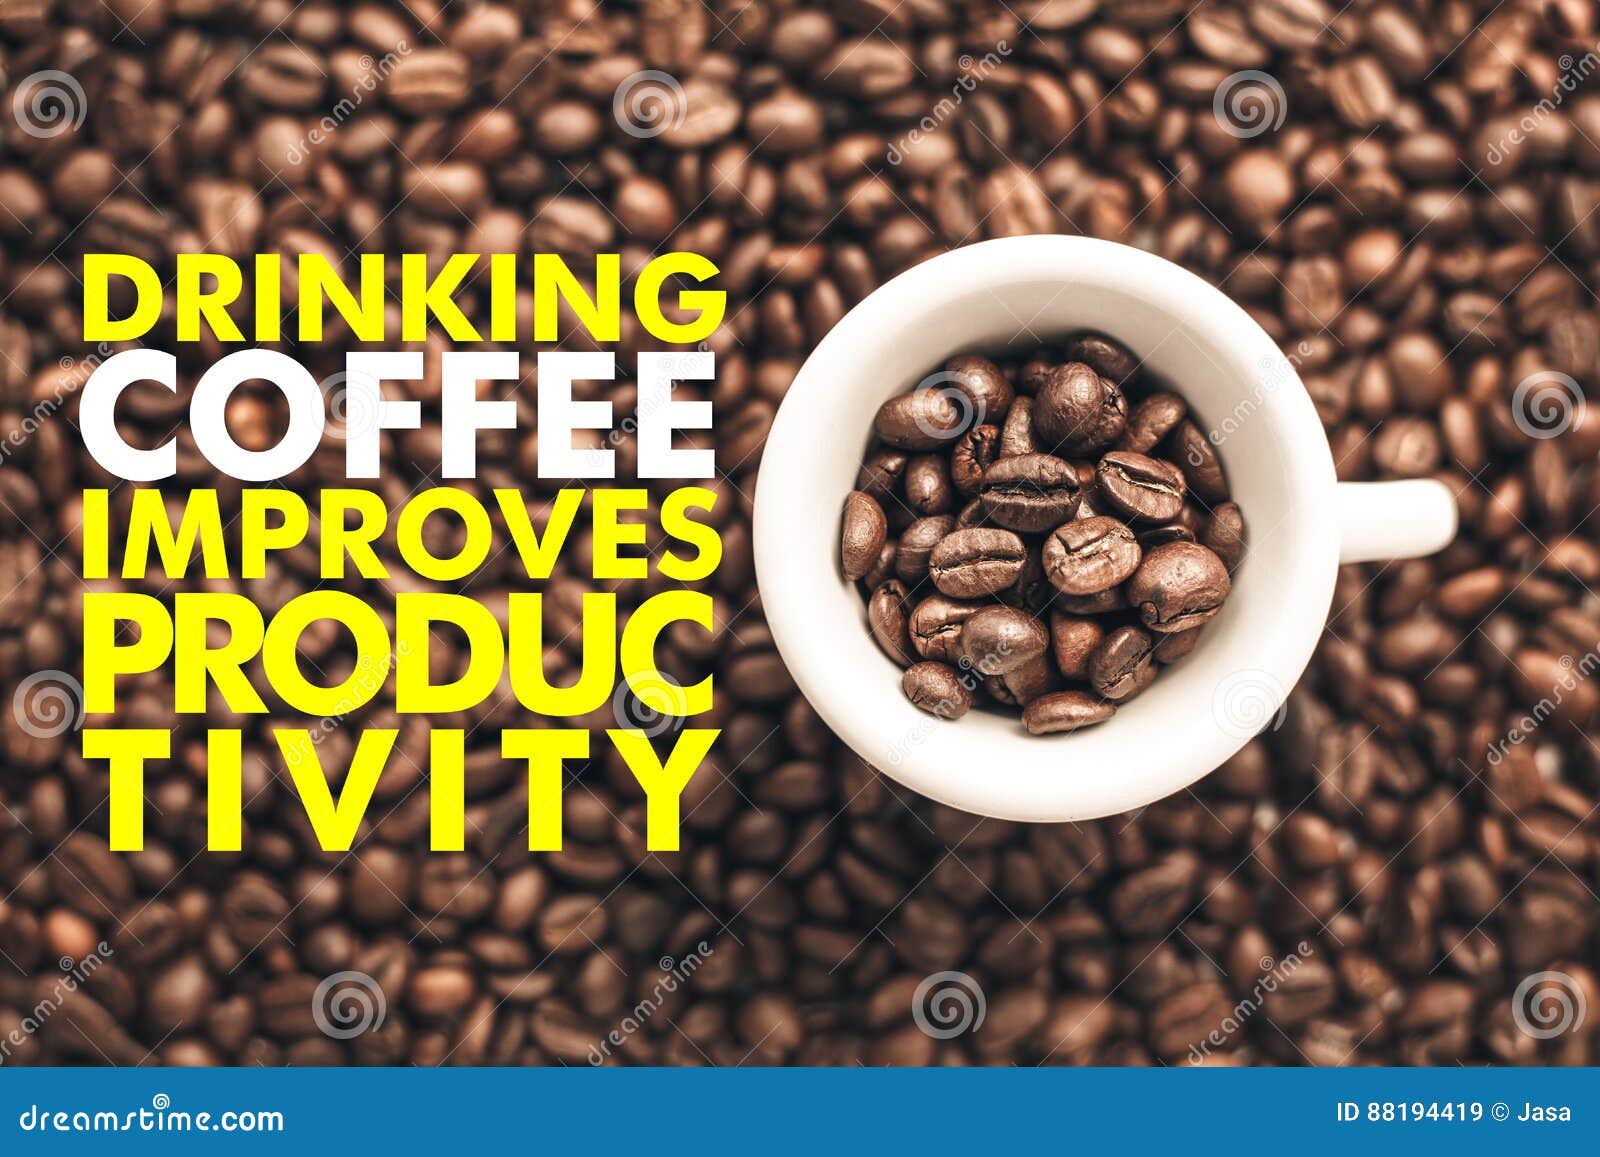 coffee cup on background with message `drinking coffee improves productivity`